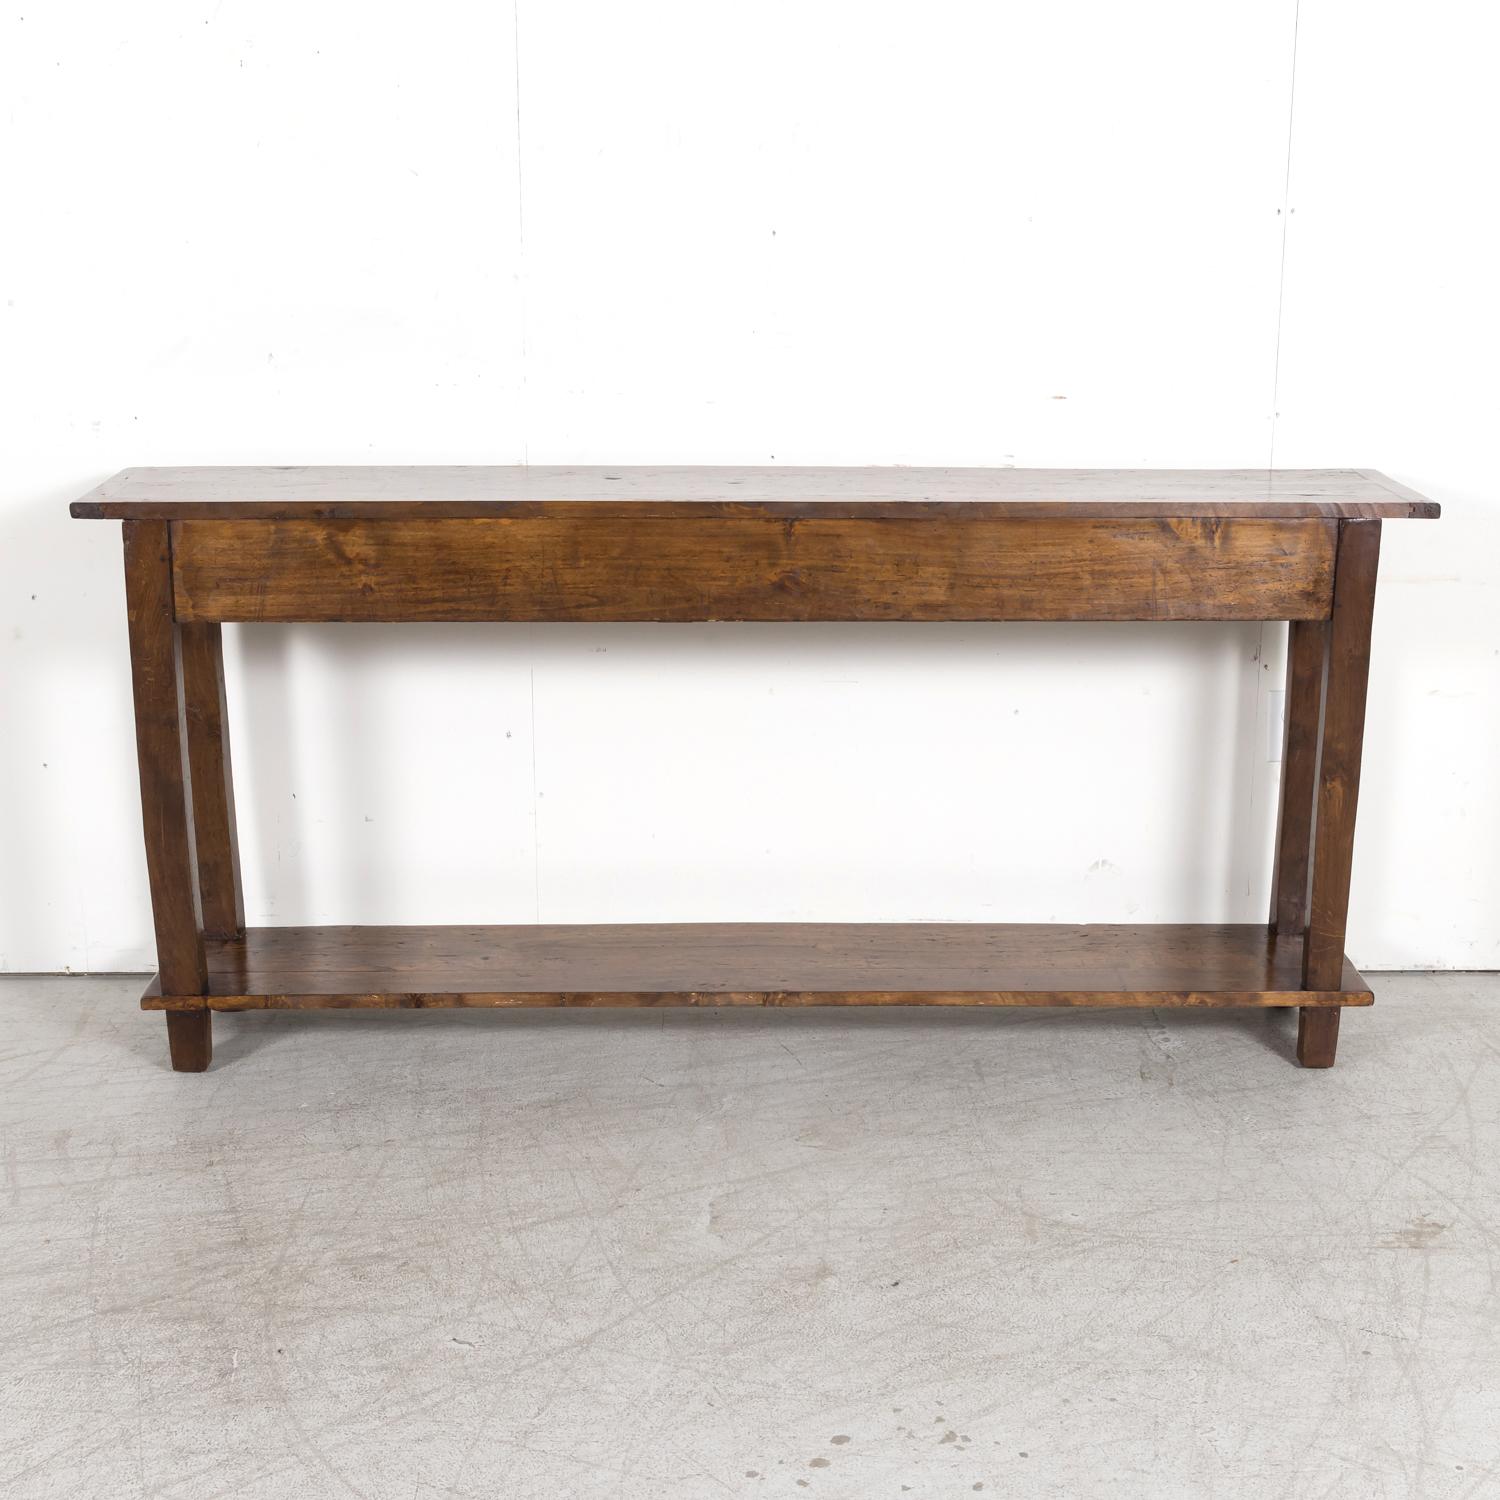 Rustic Antique Country French Walnut and Oak Console or Sofa Table with Drawers 16